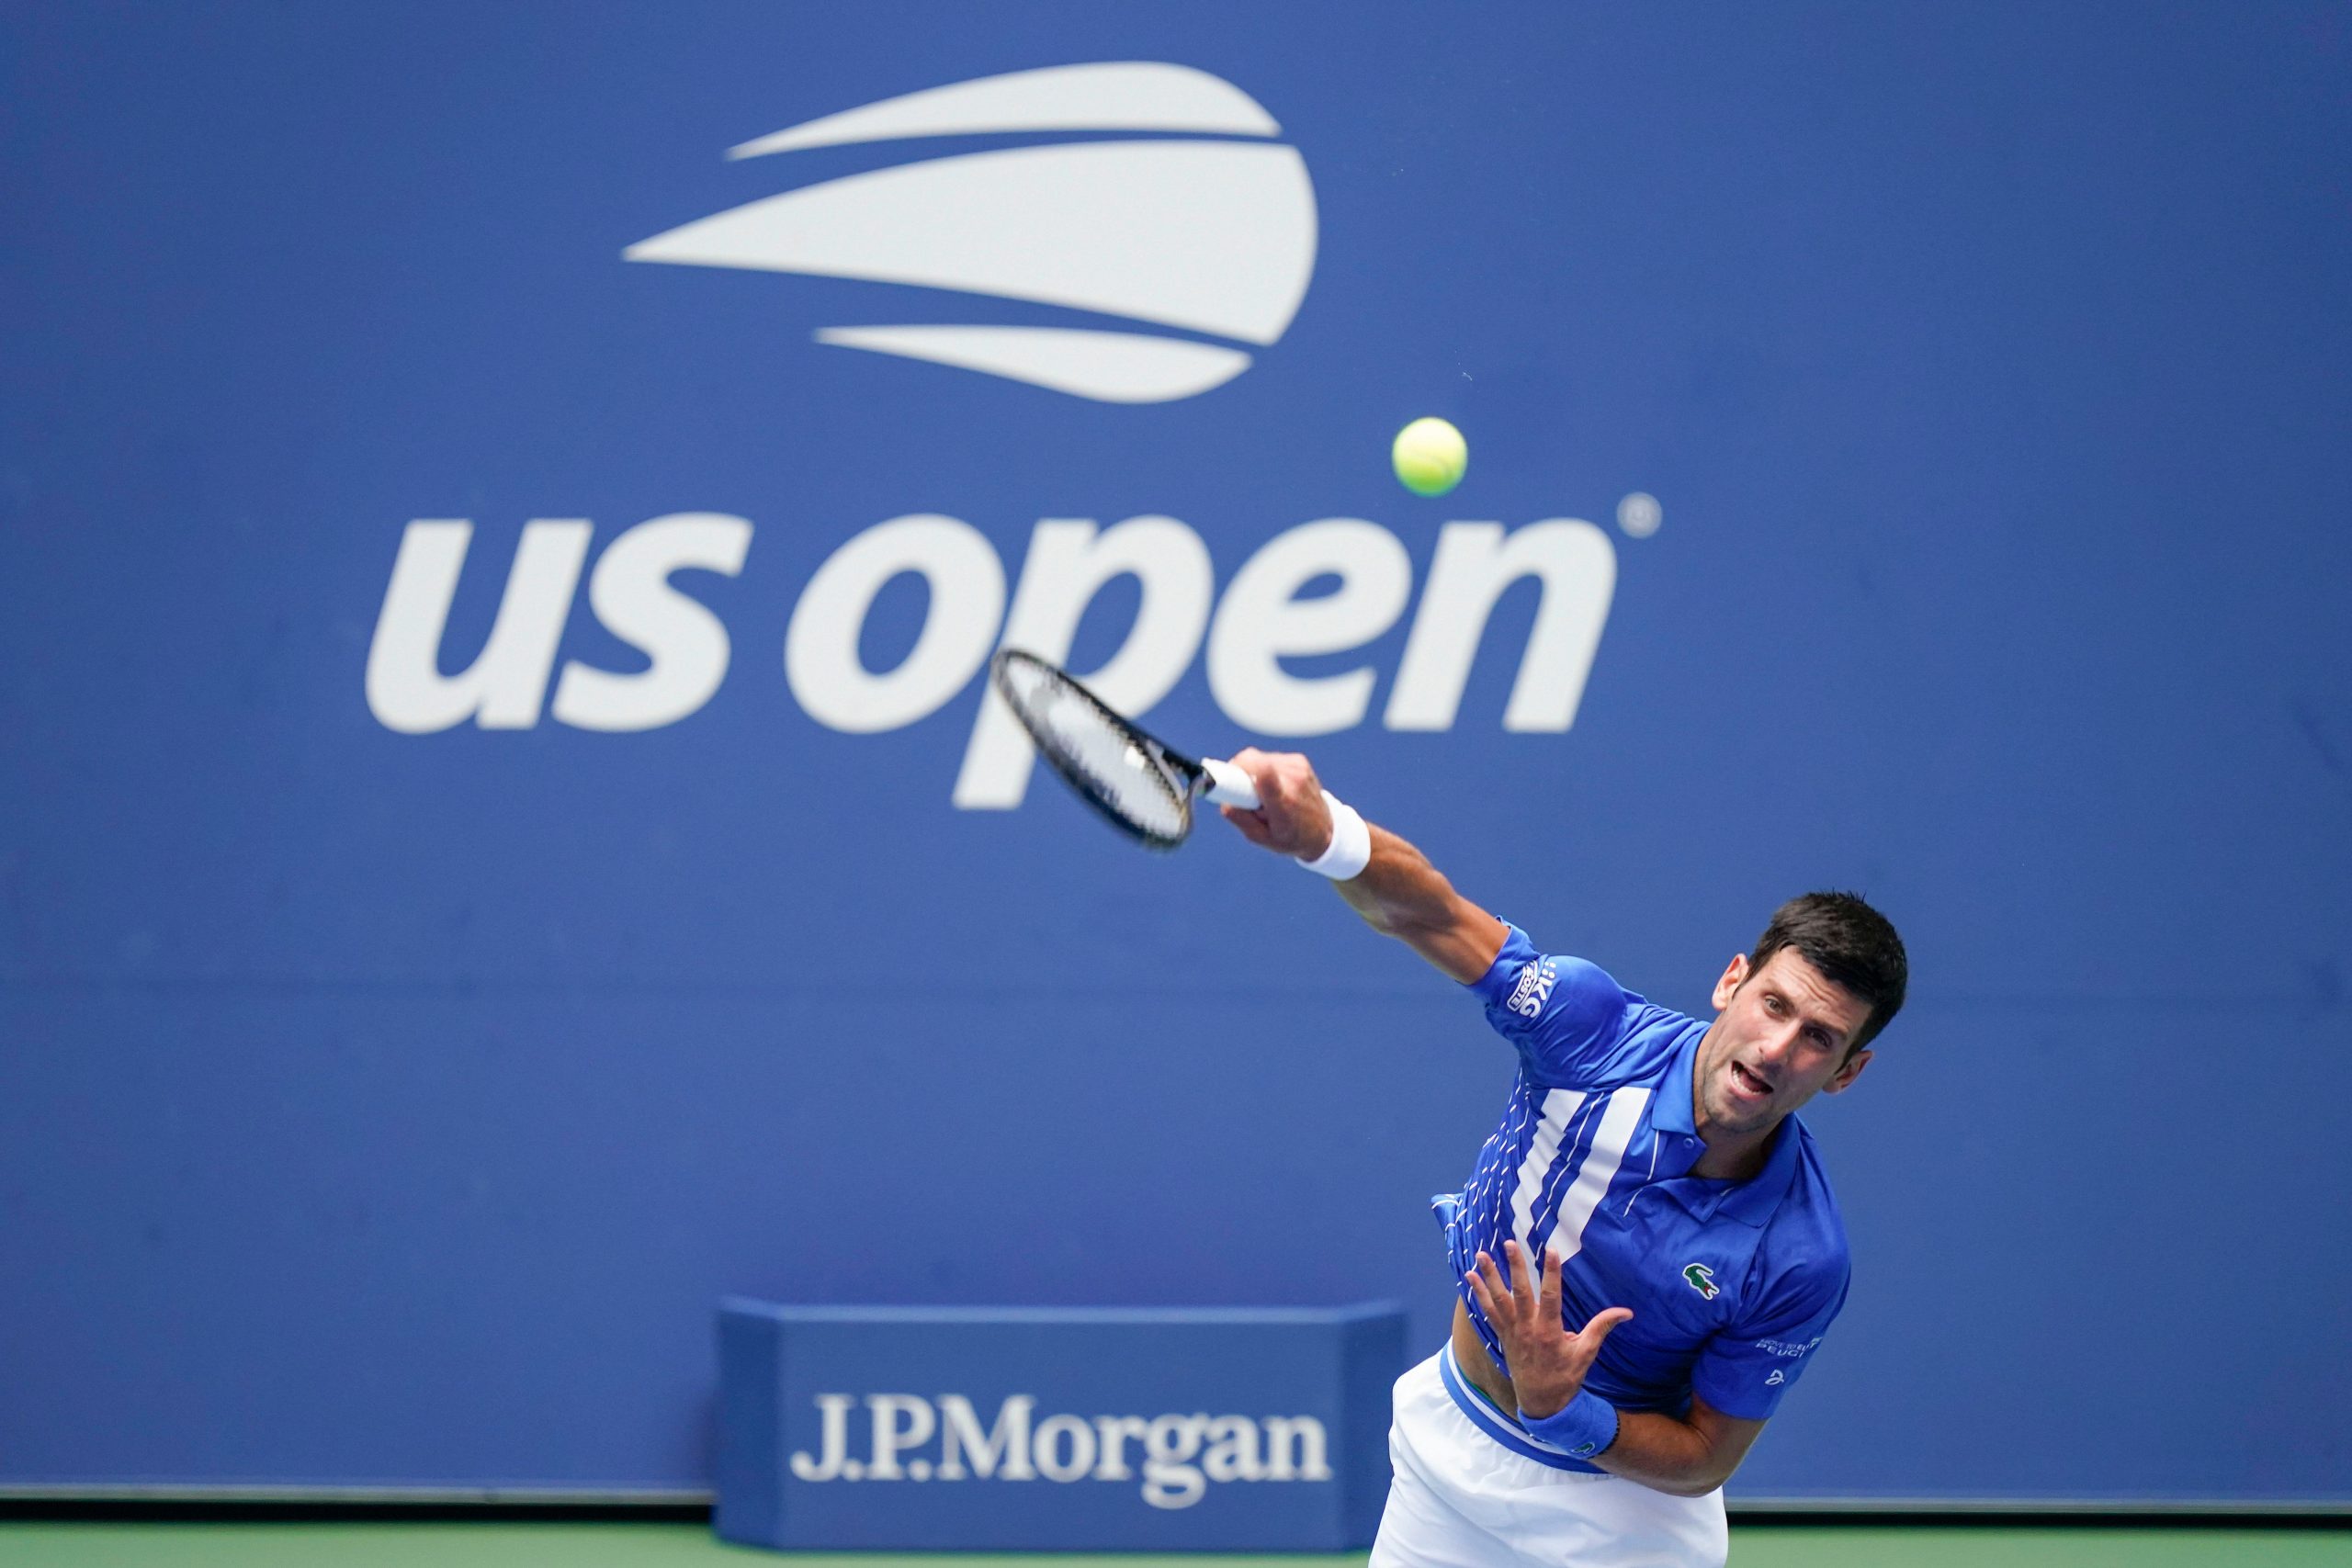 US Open: Novak Djokovic, World No 1, disqualified after accidentally hitting official with tennis ball